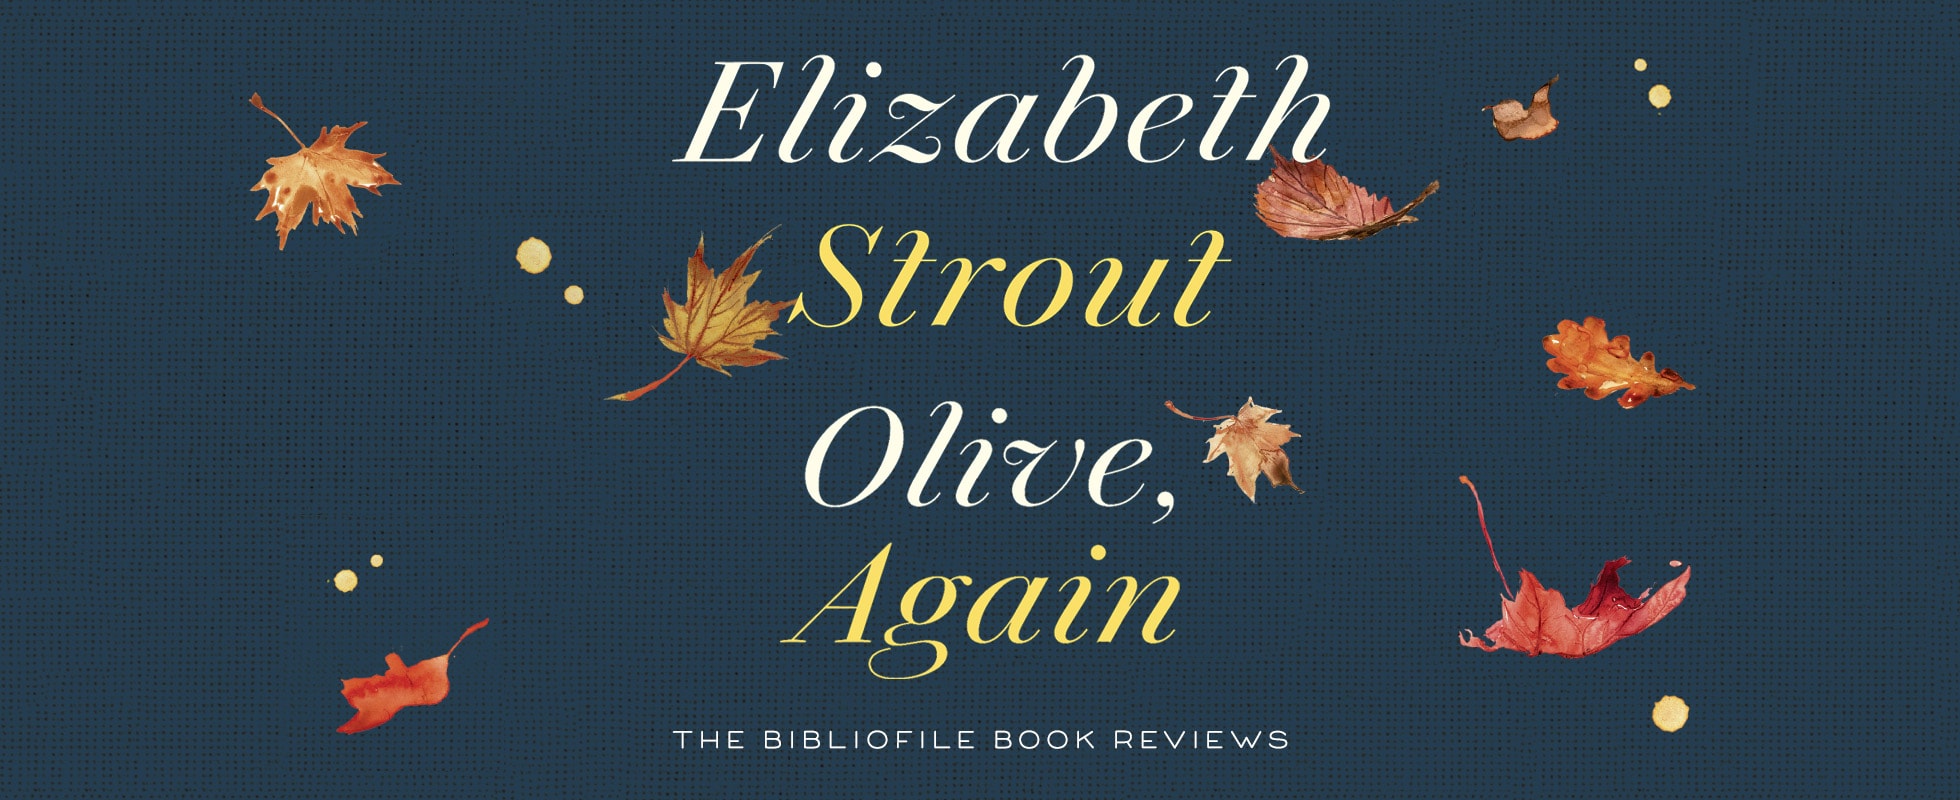 olive again elizabeth strout olive kitteridge book review summary synopsis